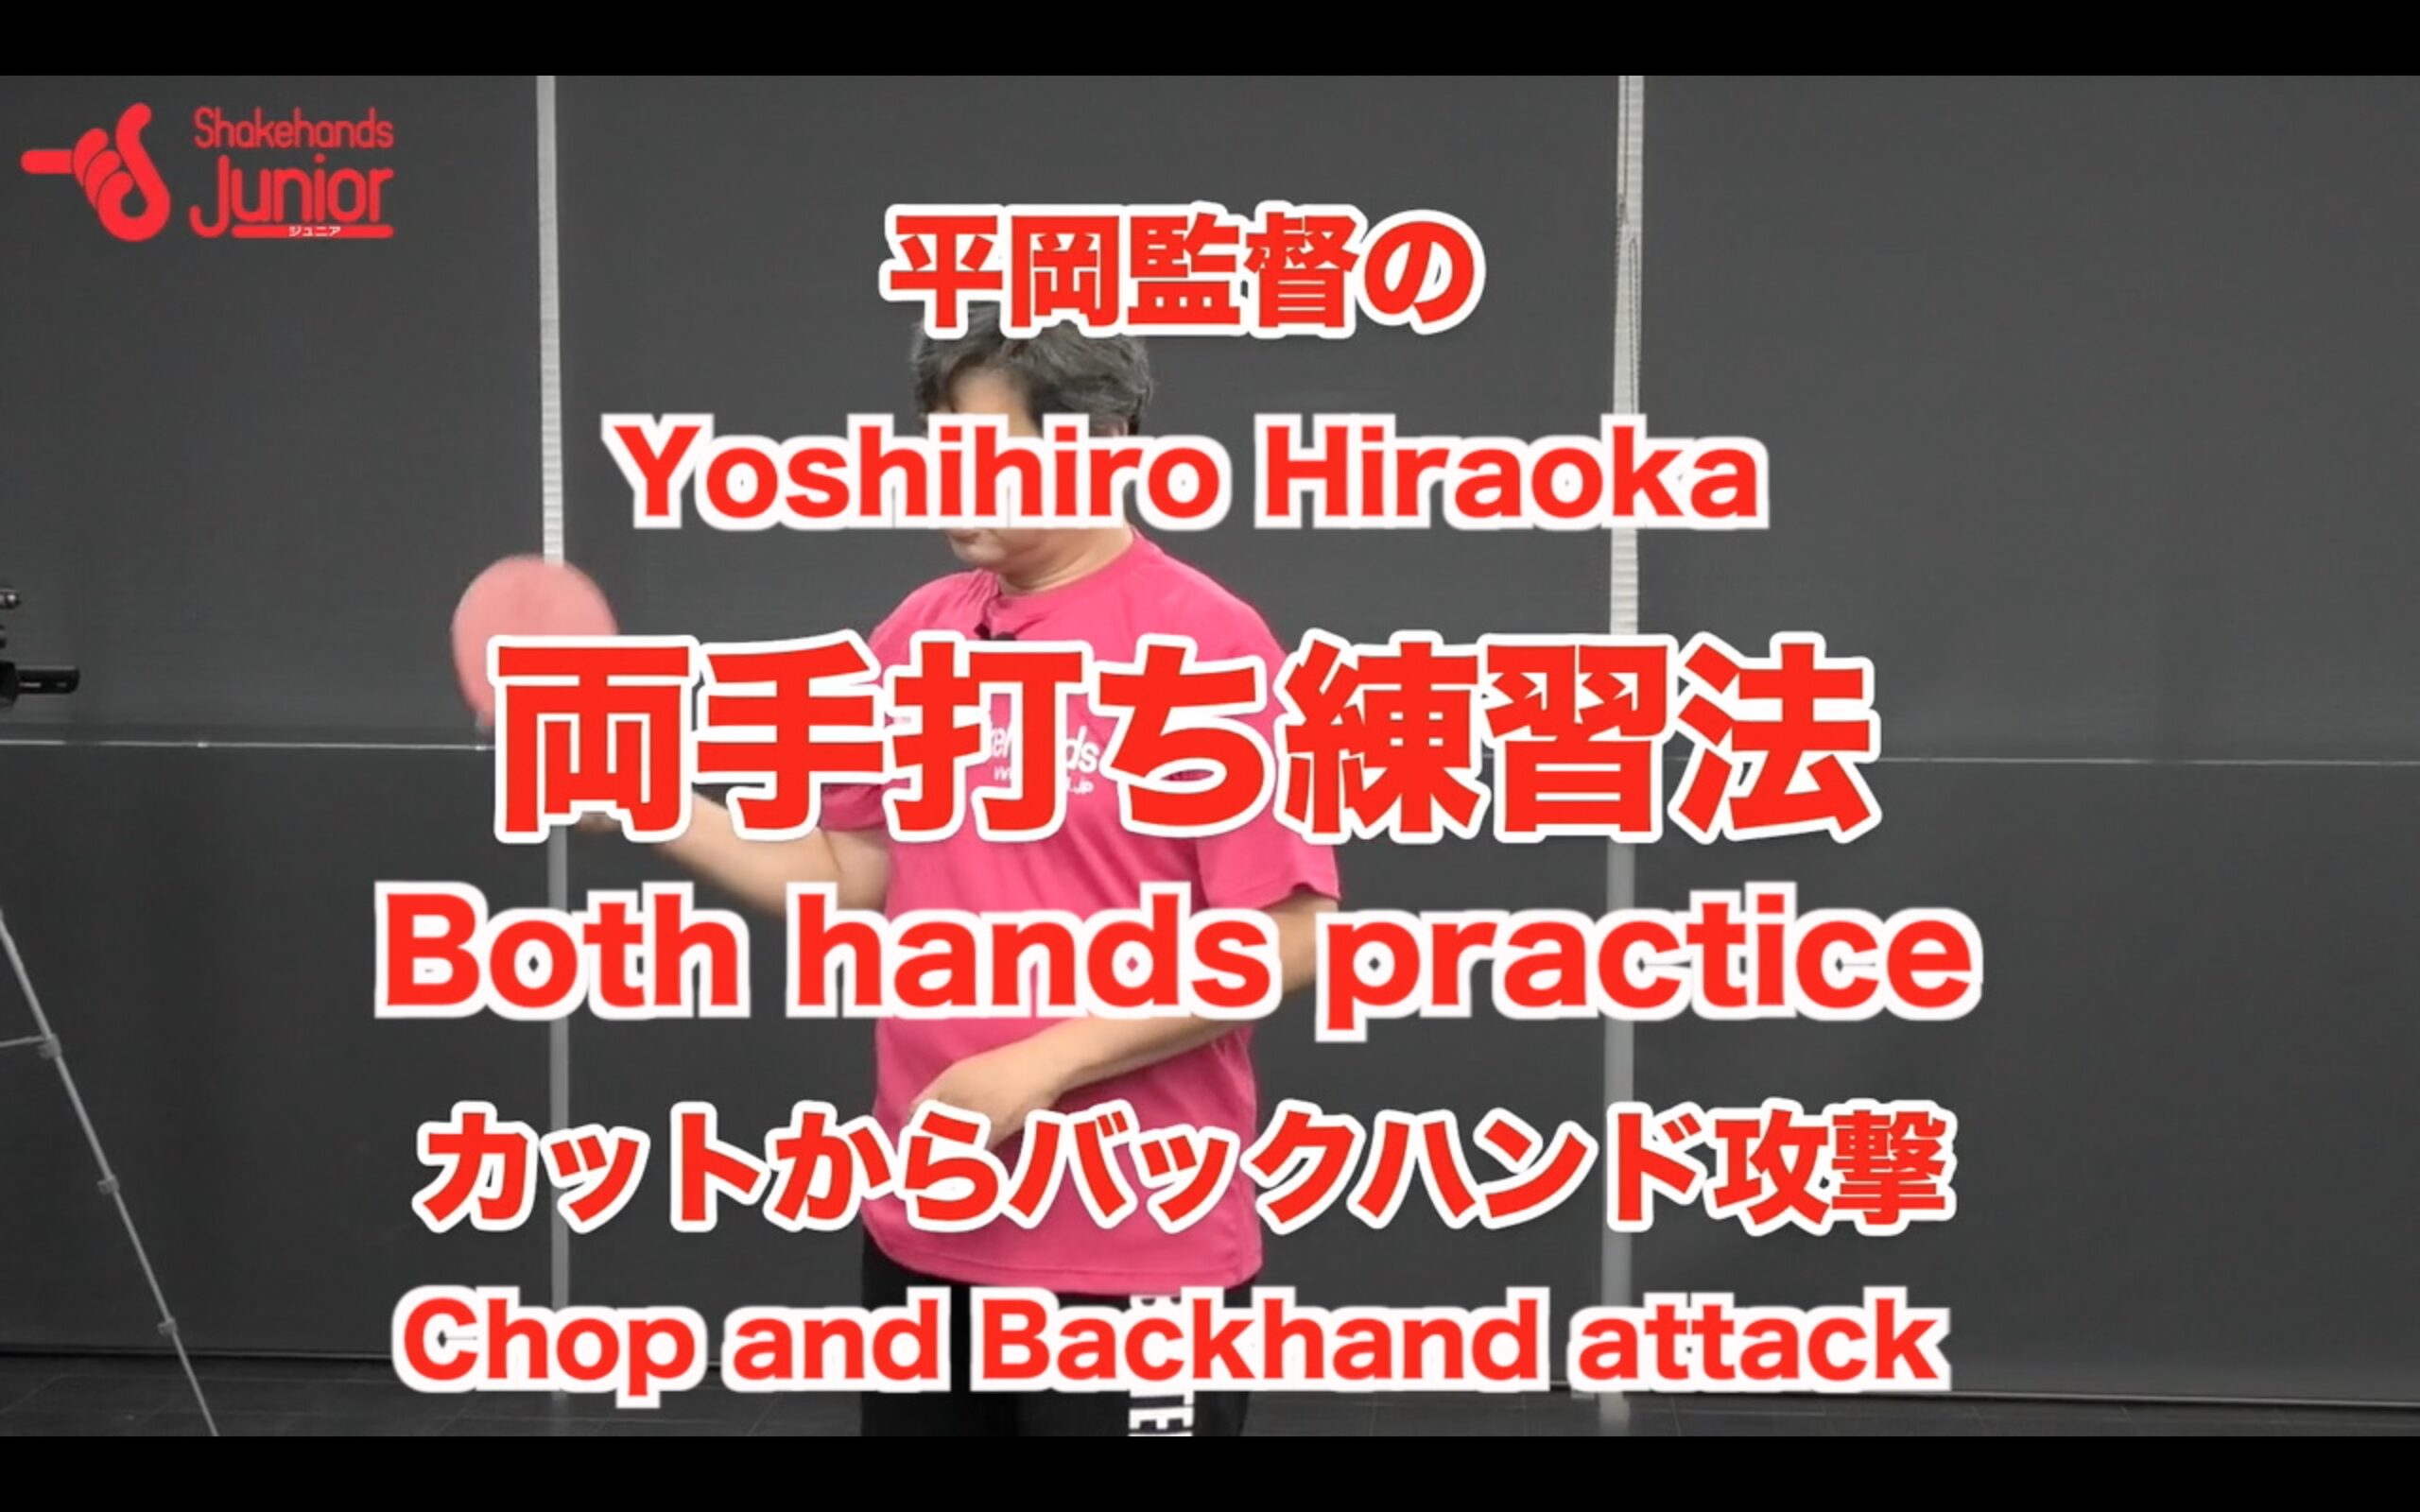 Both hands practice Chop and BH attack